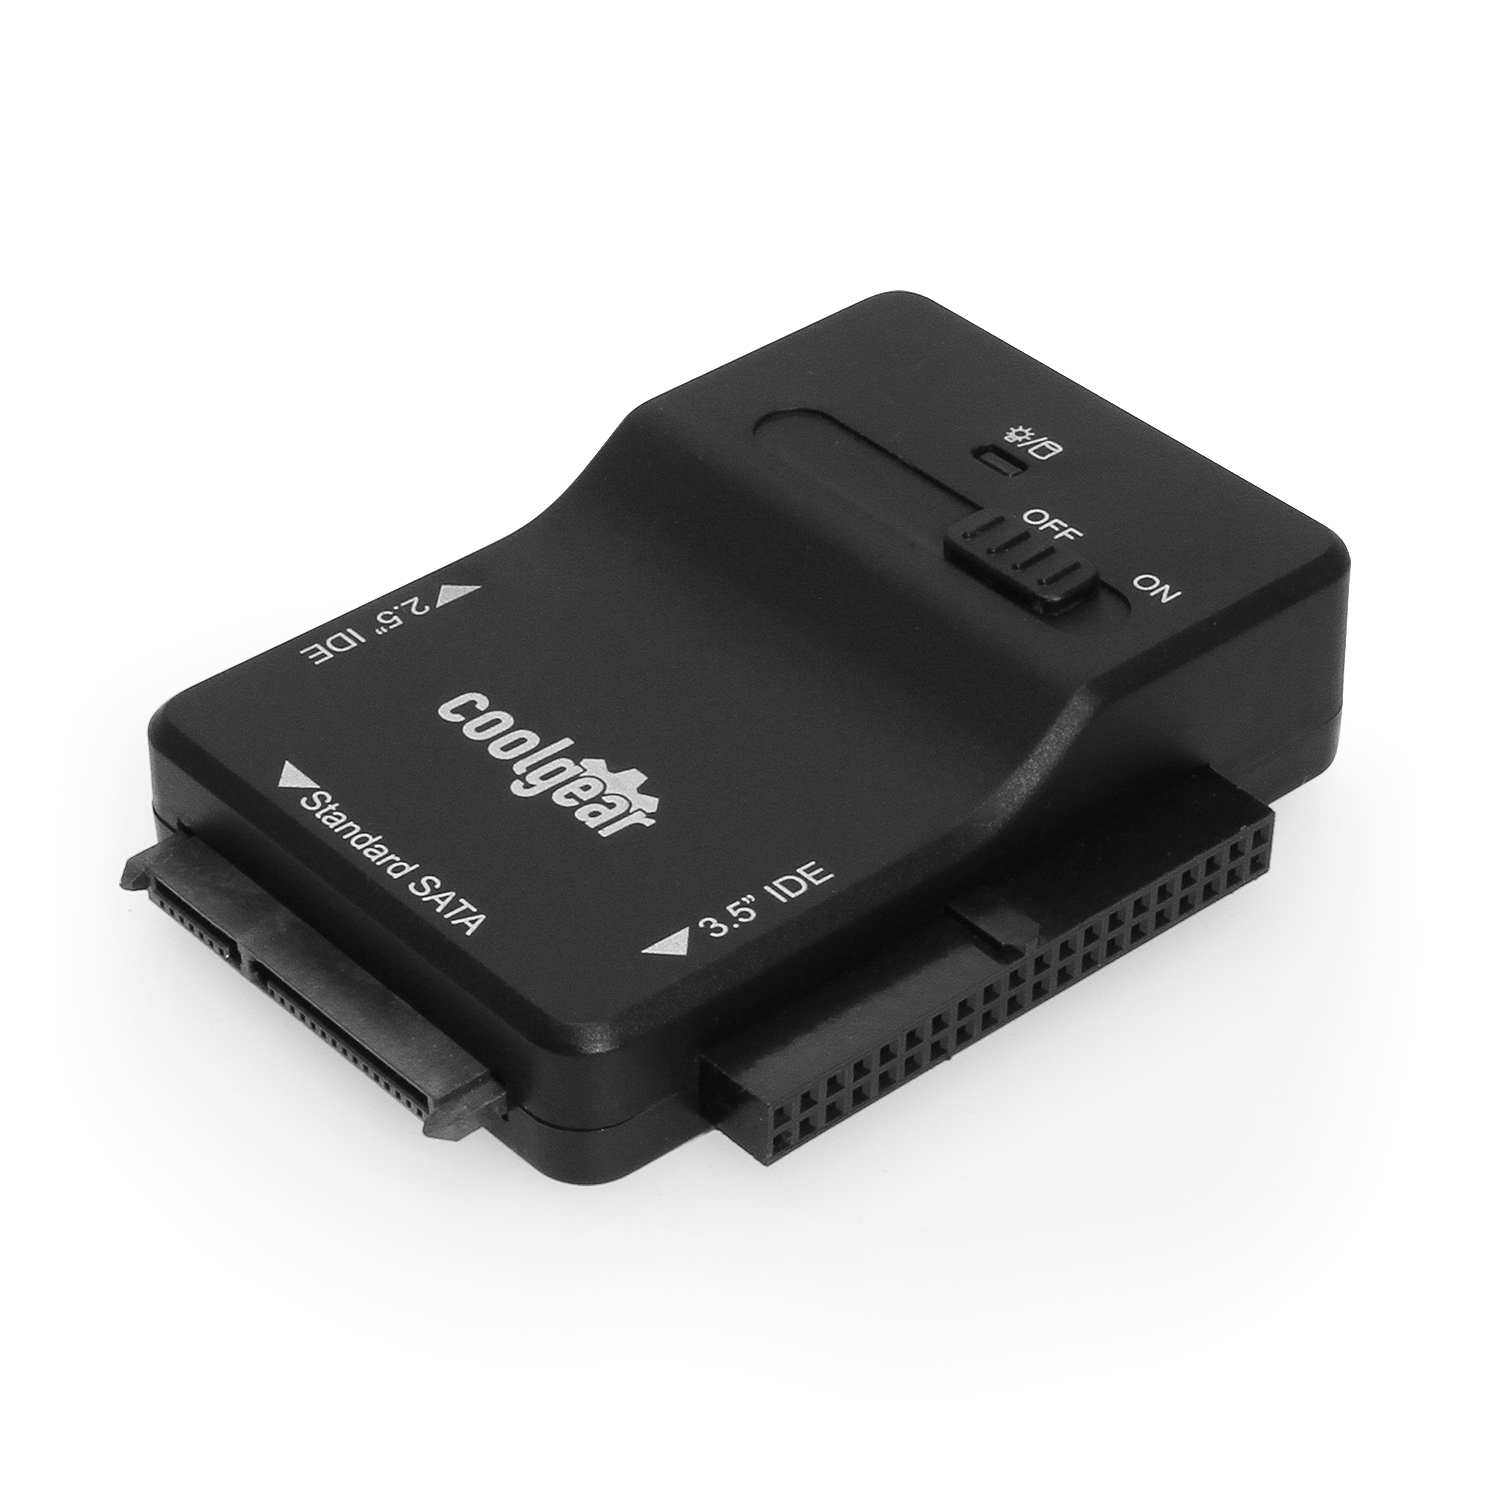 3.0 to SATA or Hard Drive Adapter - Coolgear